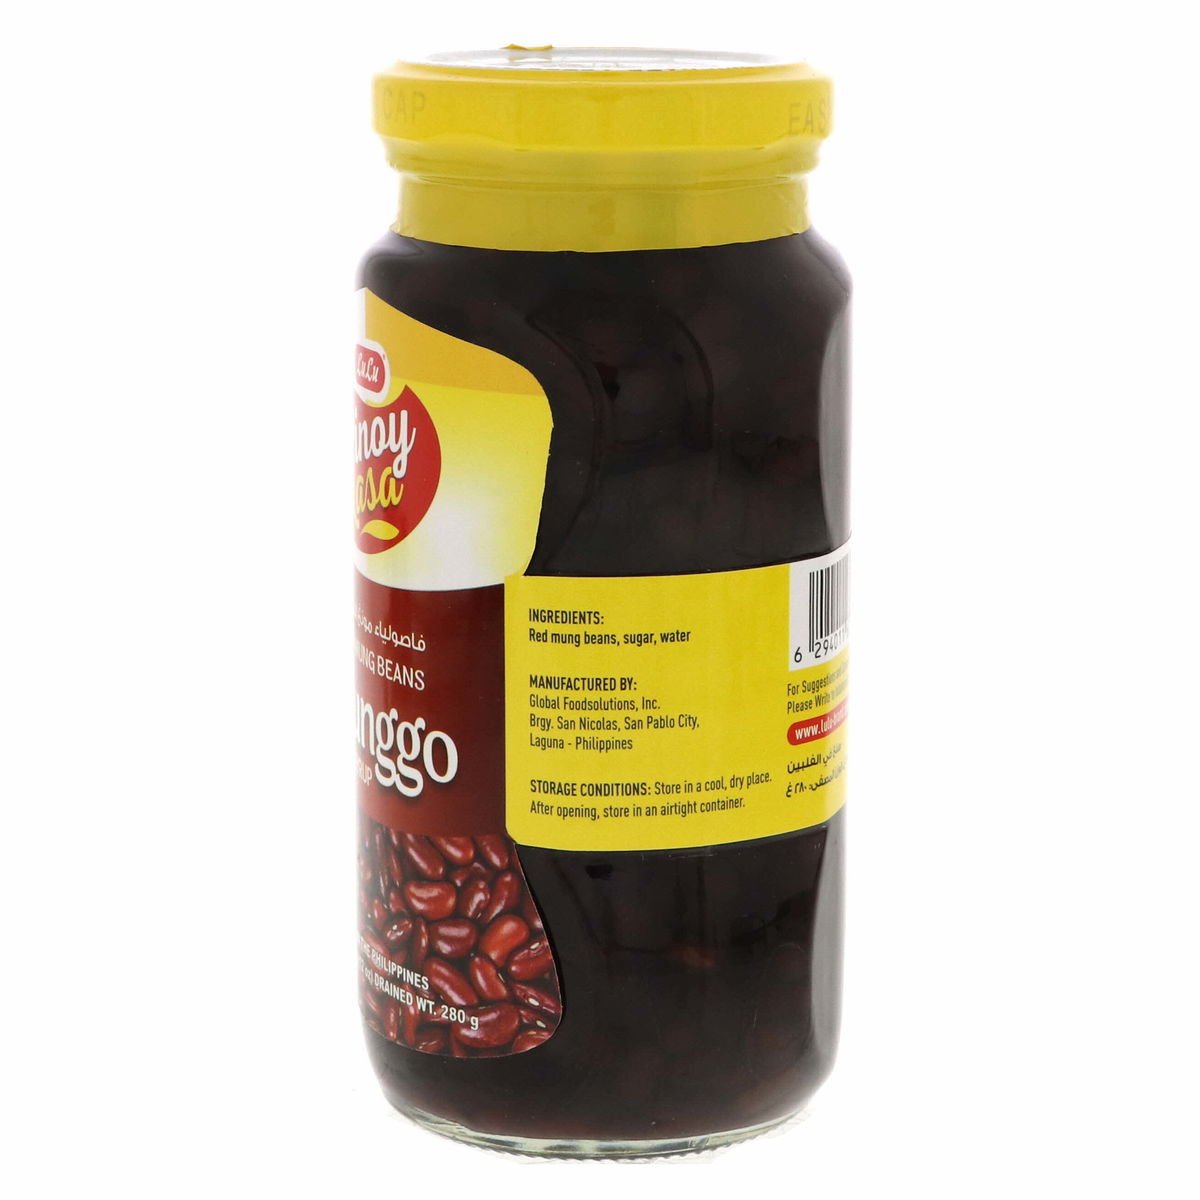 LuLu Pinoy Lasa Red Mung Beans In Syrup 340 g